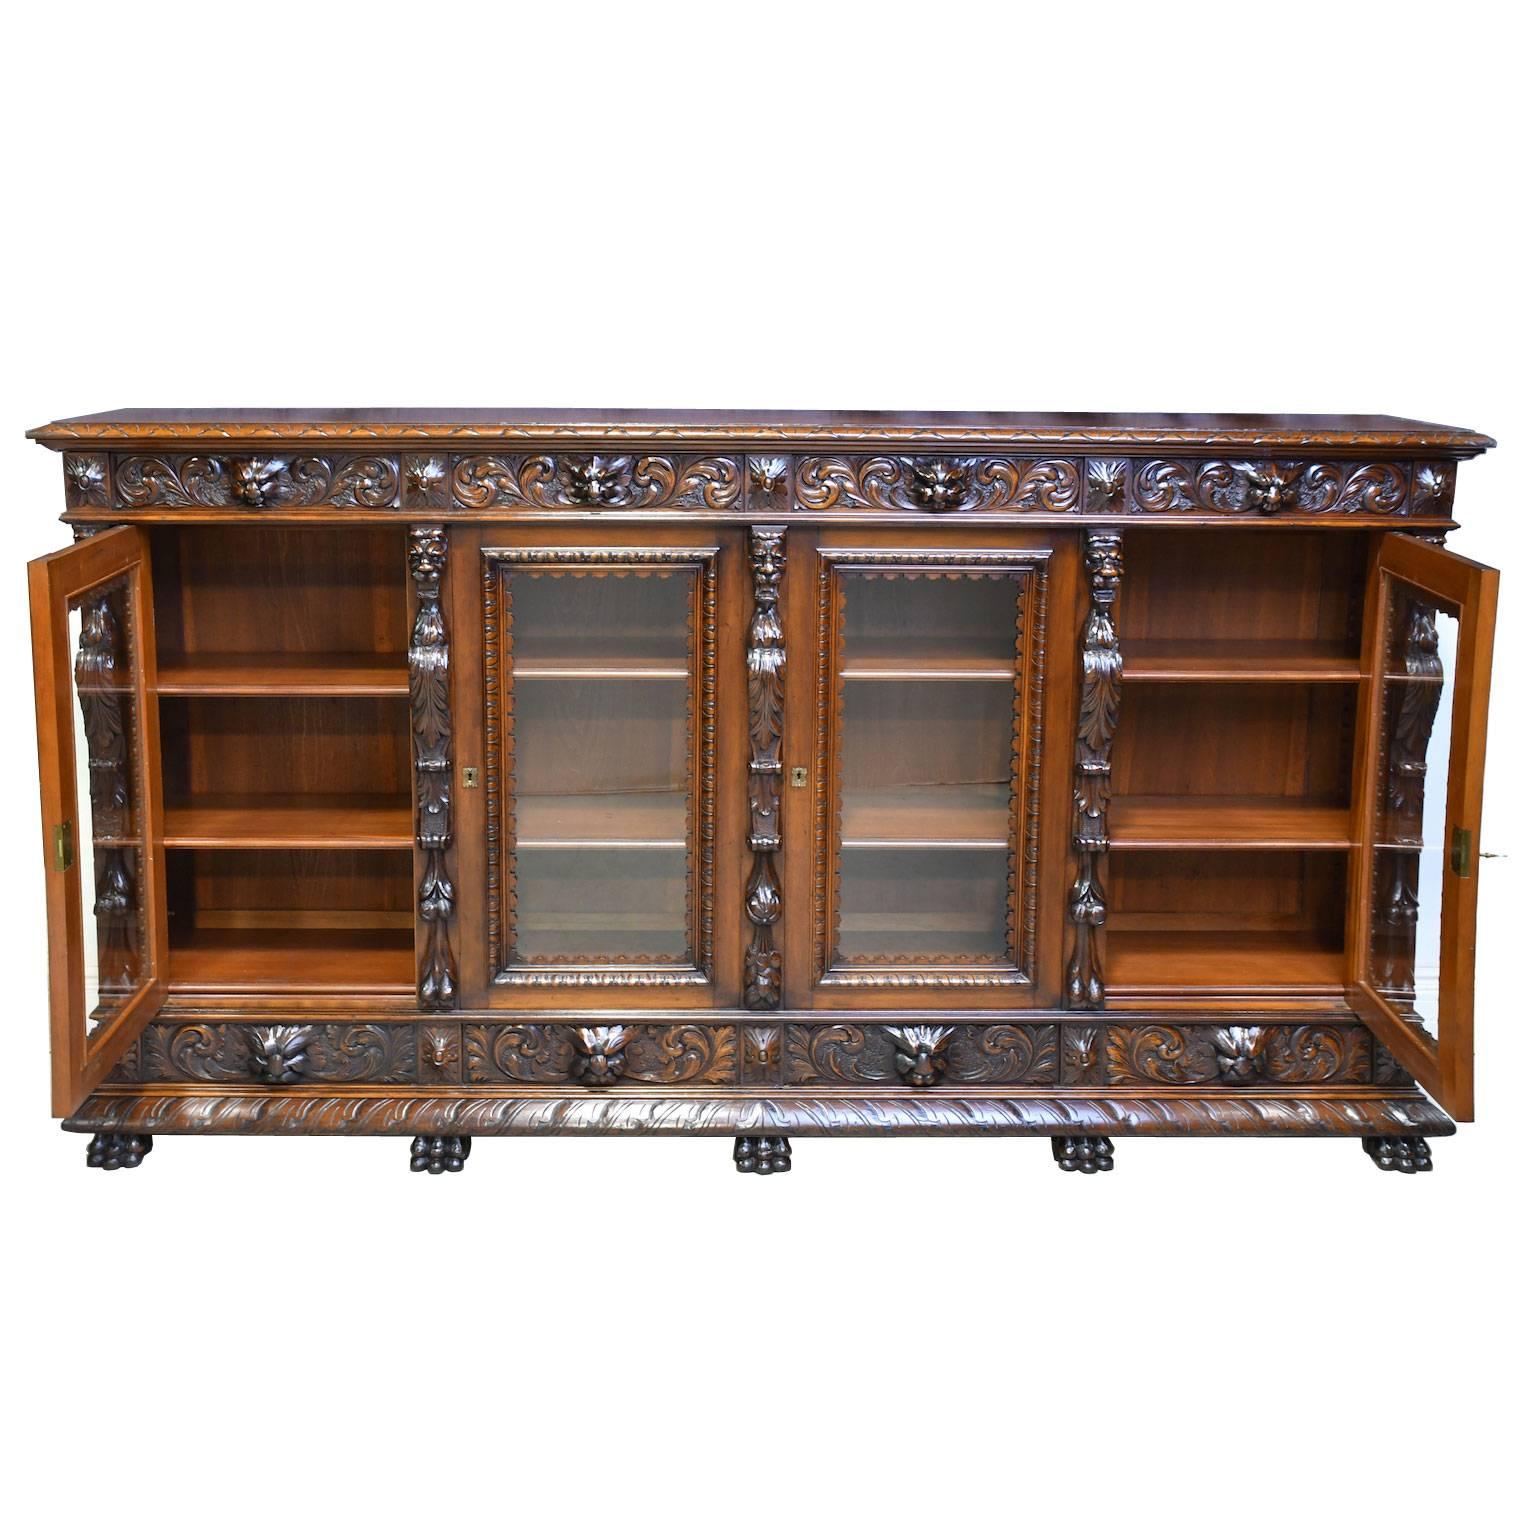 Renaissance Revival French Renaissance-Style Bookcase in Walnut with Original Glass, circa 1900